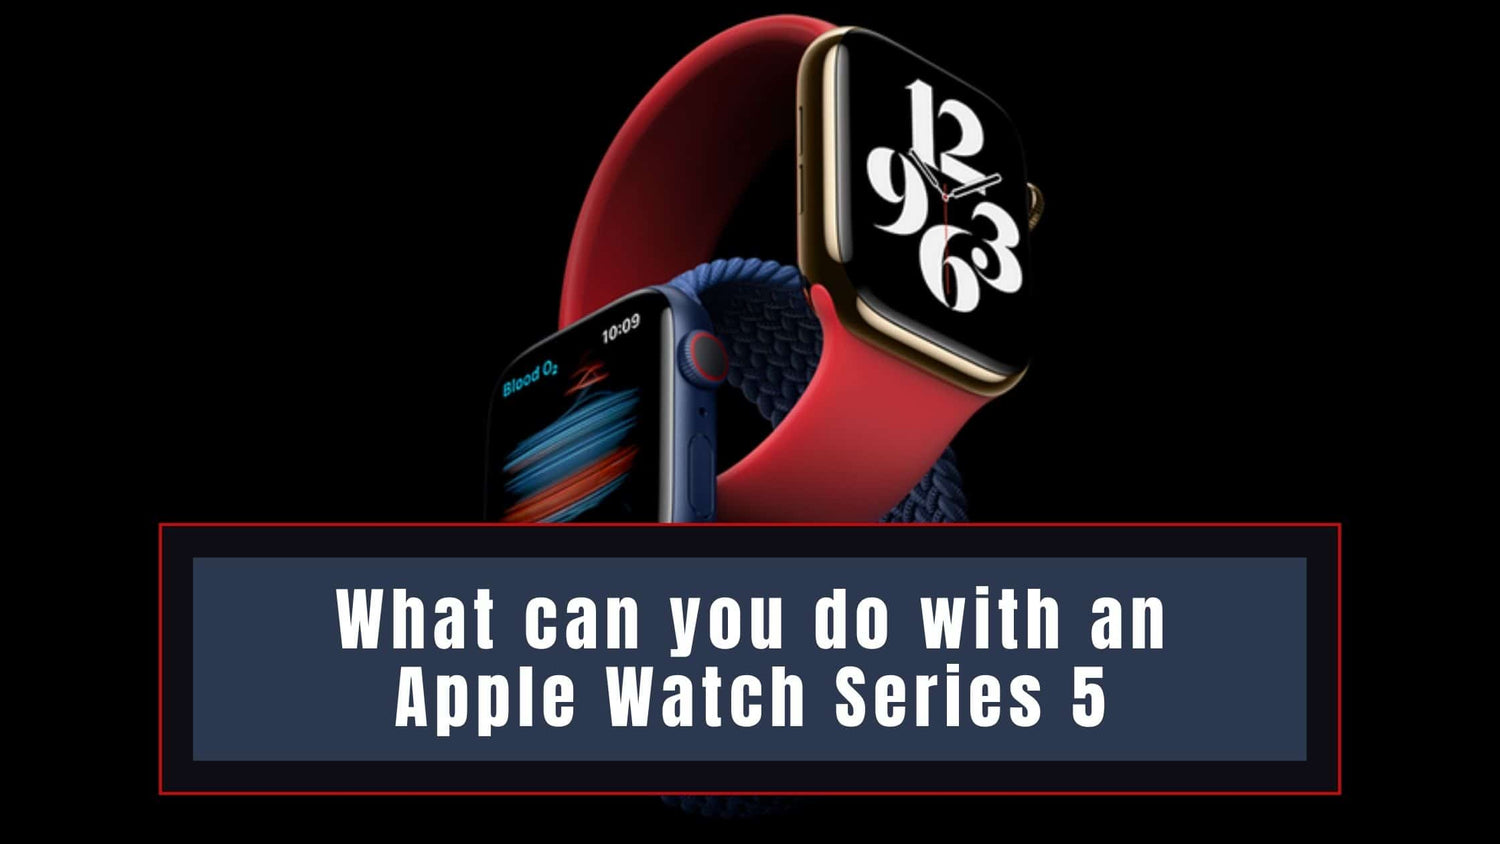 What can you do with an Apple Watch Series 5